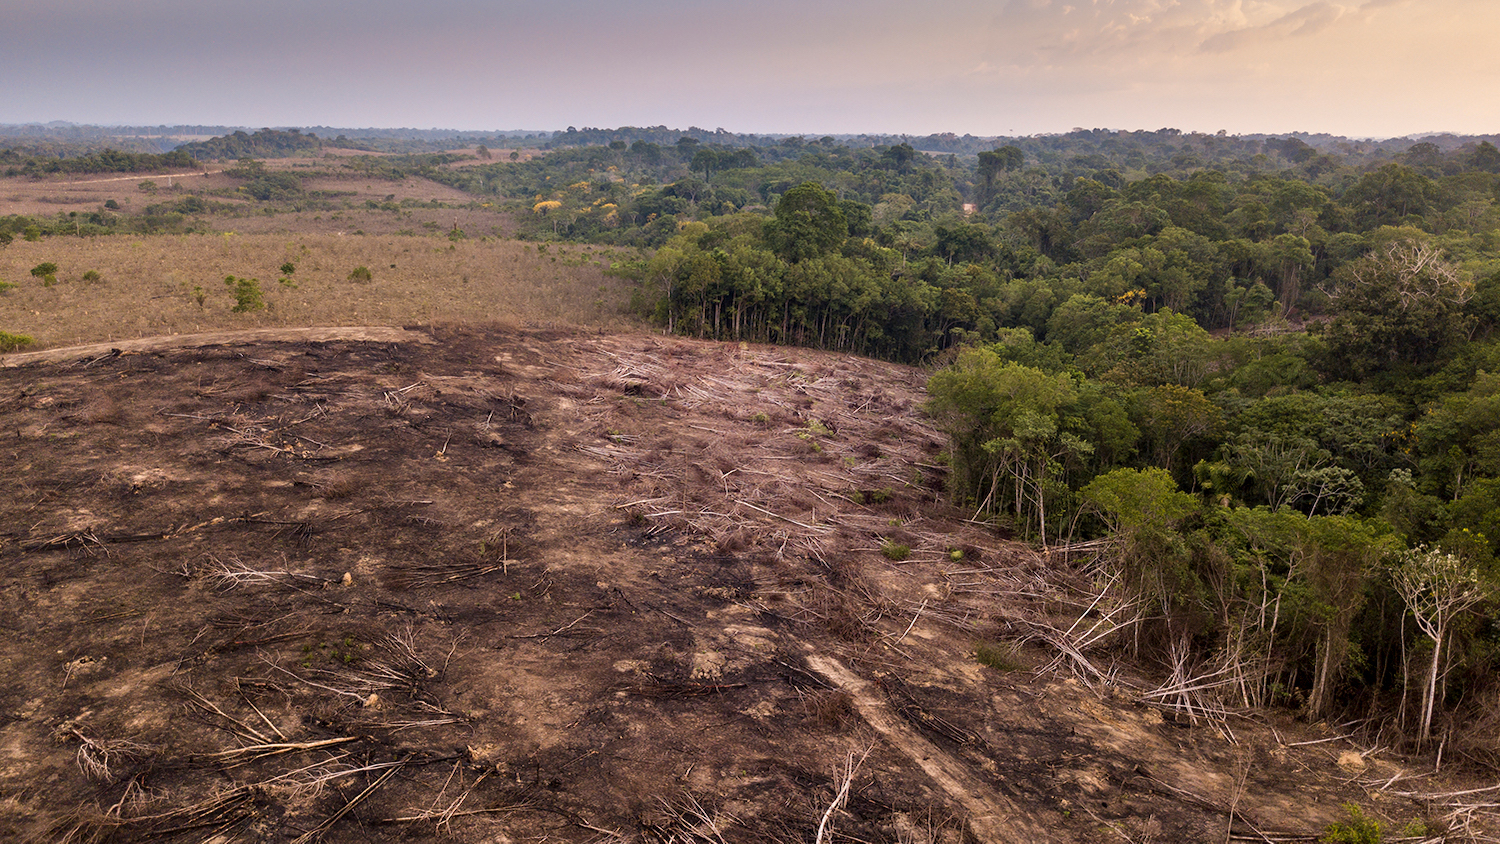 Amazon Rainforest deforestation - Is It Too Late to Save the Amazon Rainforest? - Forestry and Environmental Resources NC State University